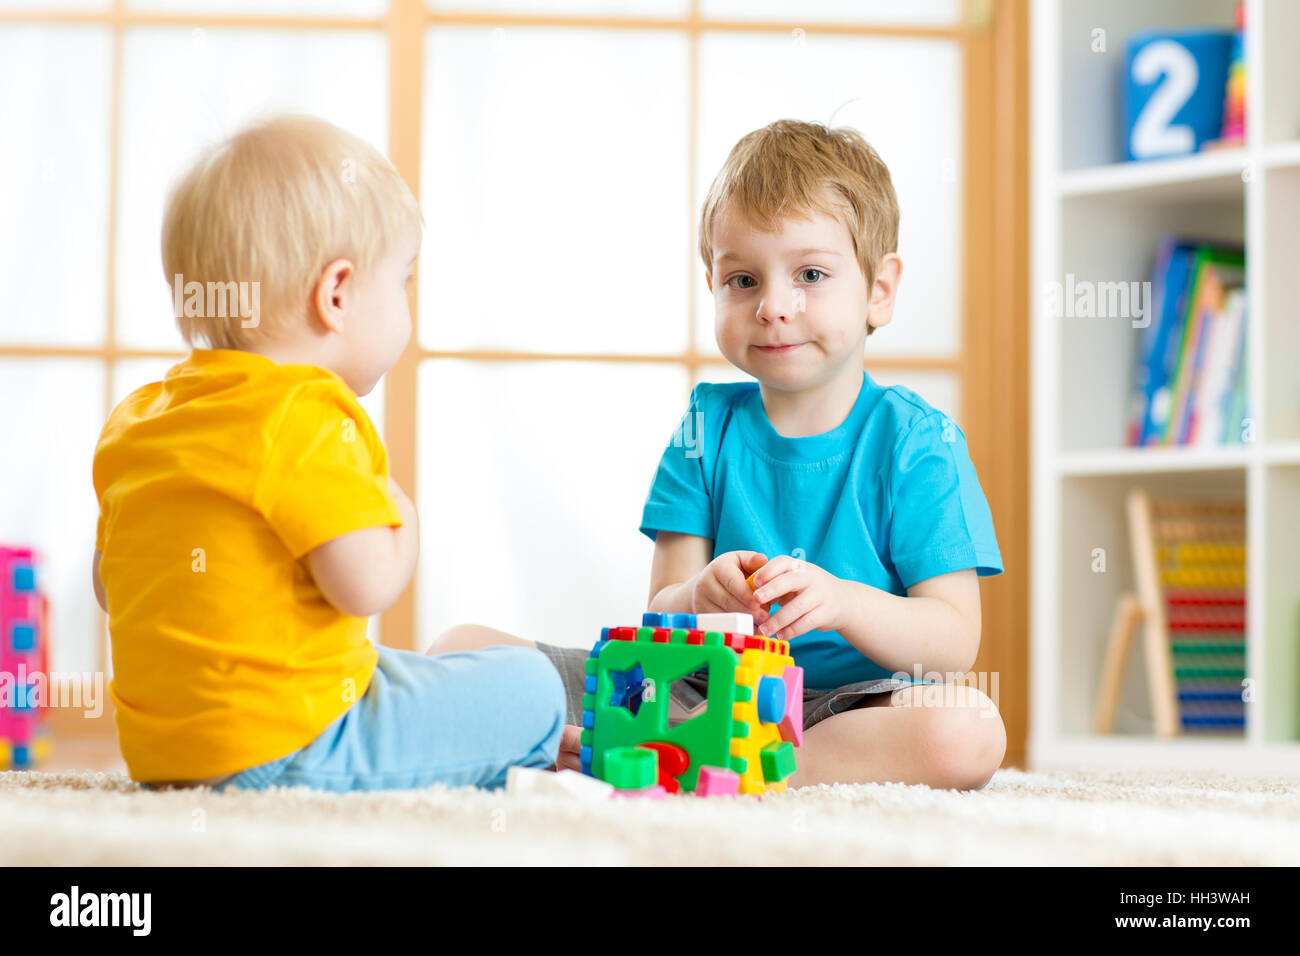 Children boys playing with logical educational toys, arranging and sorting shapes and sizes Stock Photo